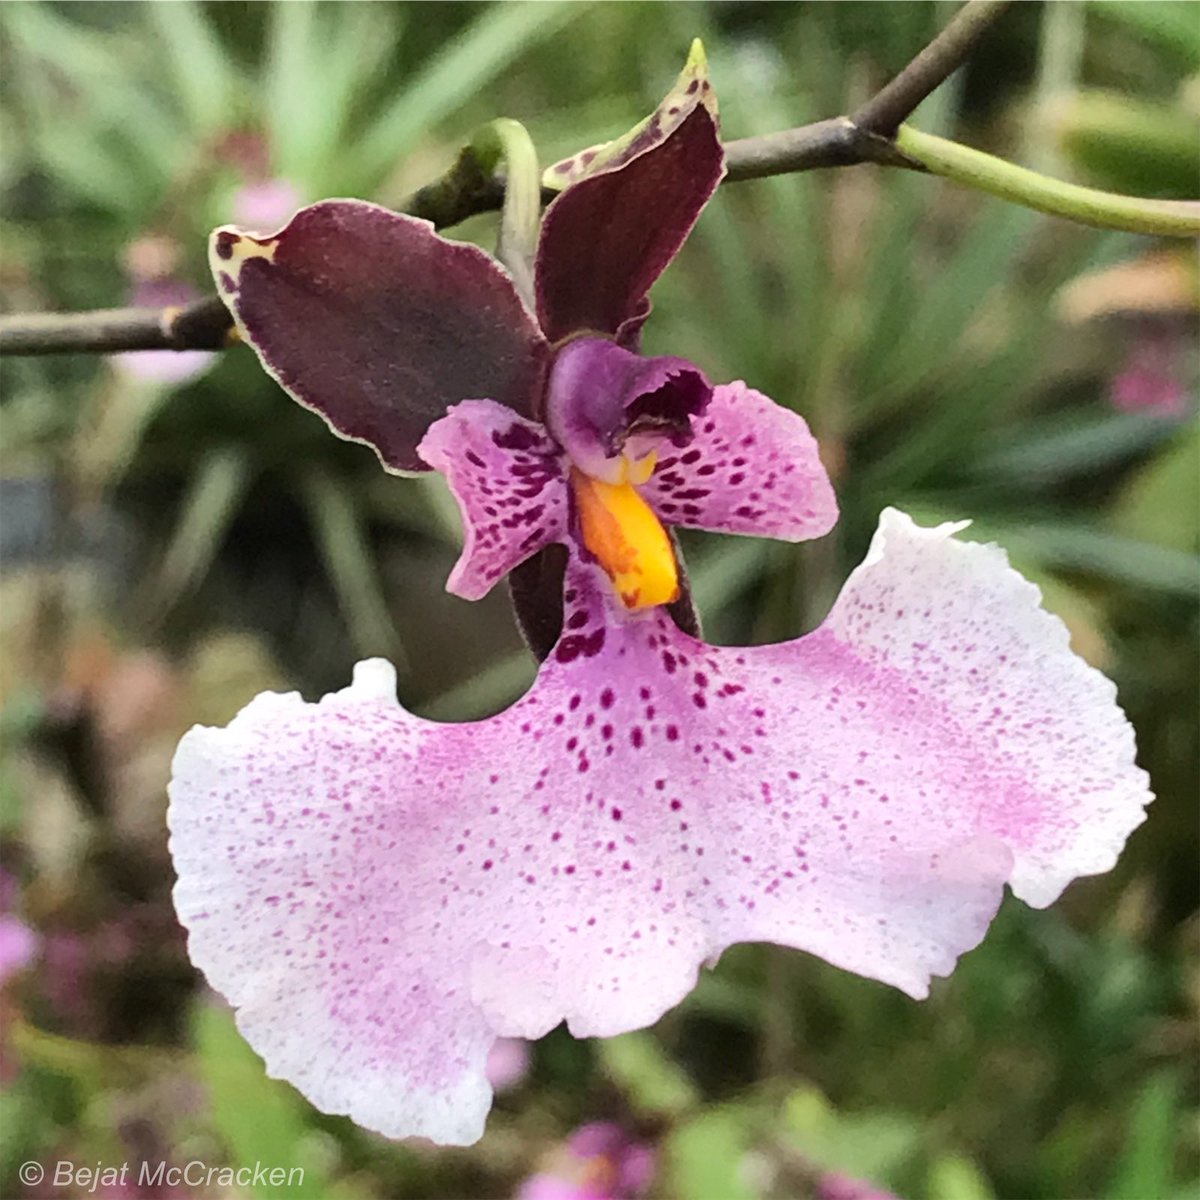 #GoodMorning 
Did you know that 90% of the #orchid species in the world are found in tropical environments? More than half of orchids are epiphytic plants. 
#Caucaea #Orchidaceae #Flora  #DiscoverEcuador #EcuadorIsAllYouNeed #iPhonePhoto #BejatMcCrackenEnvironmentalArtStudios